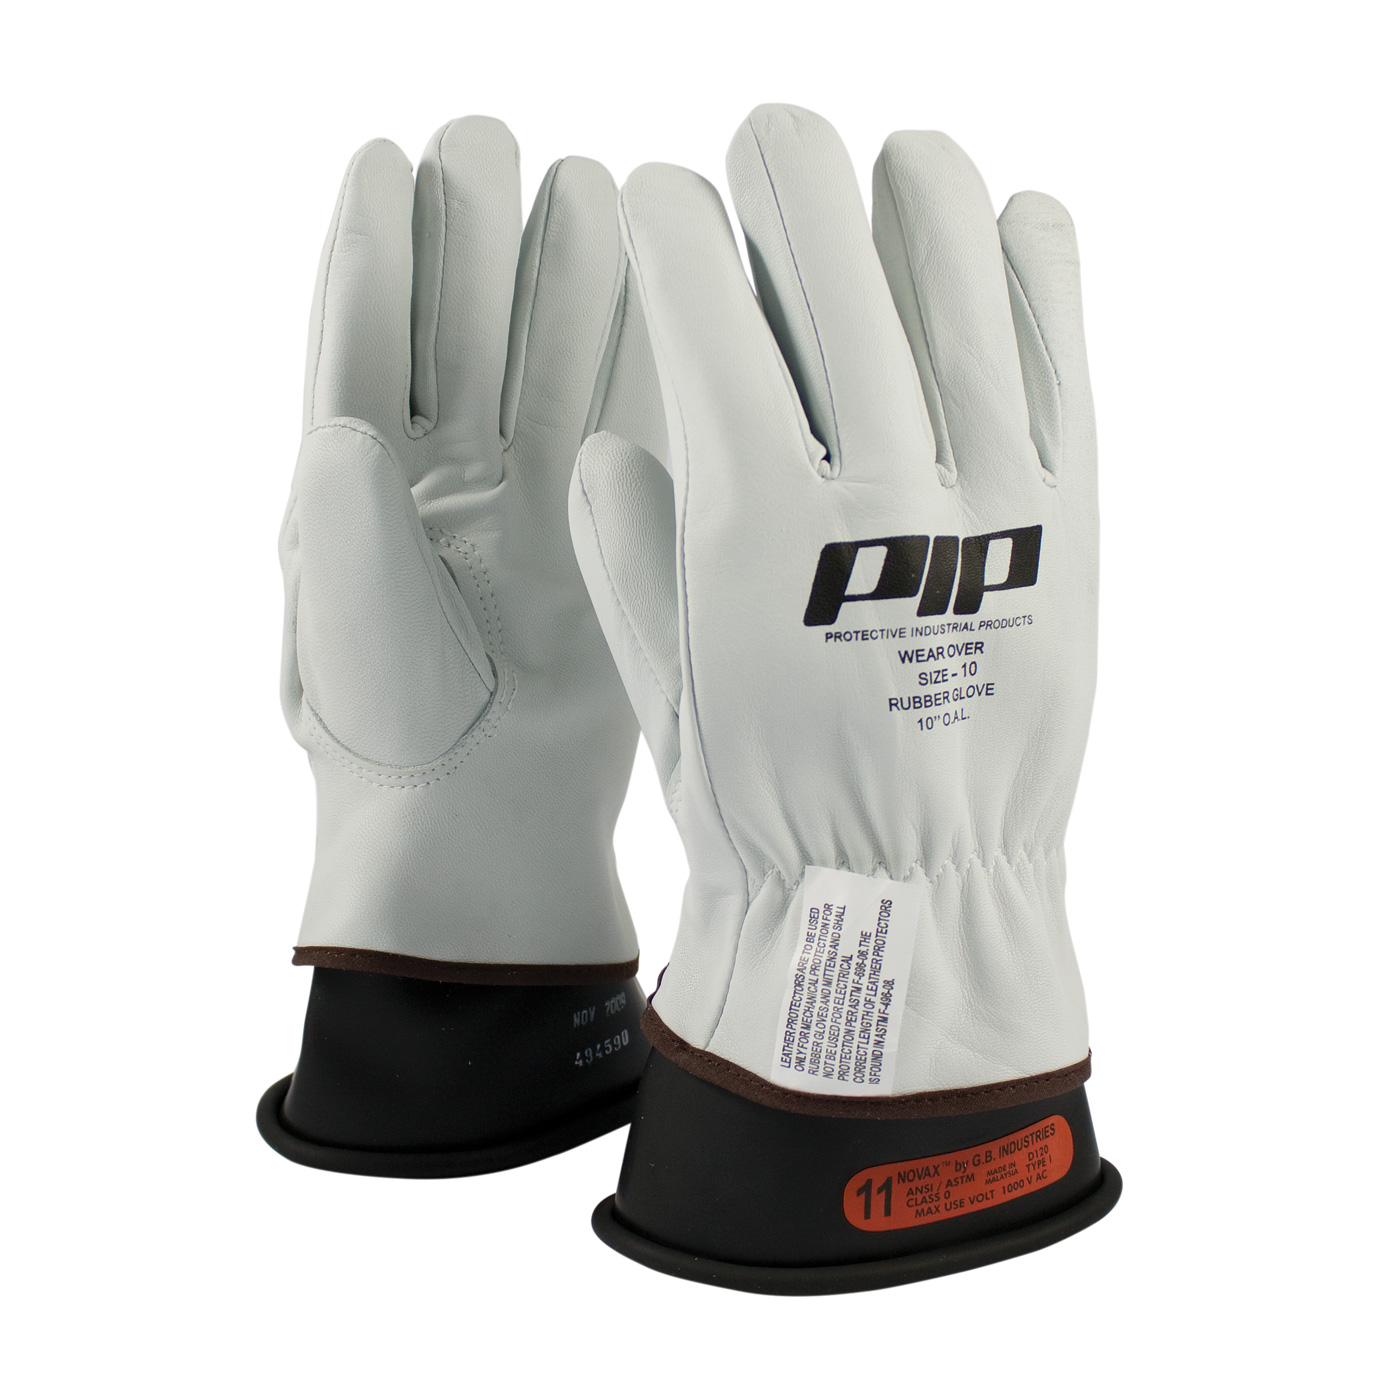 Shop for Electrical Safety Work Gloves MDS Associates, Inc.